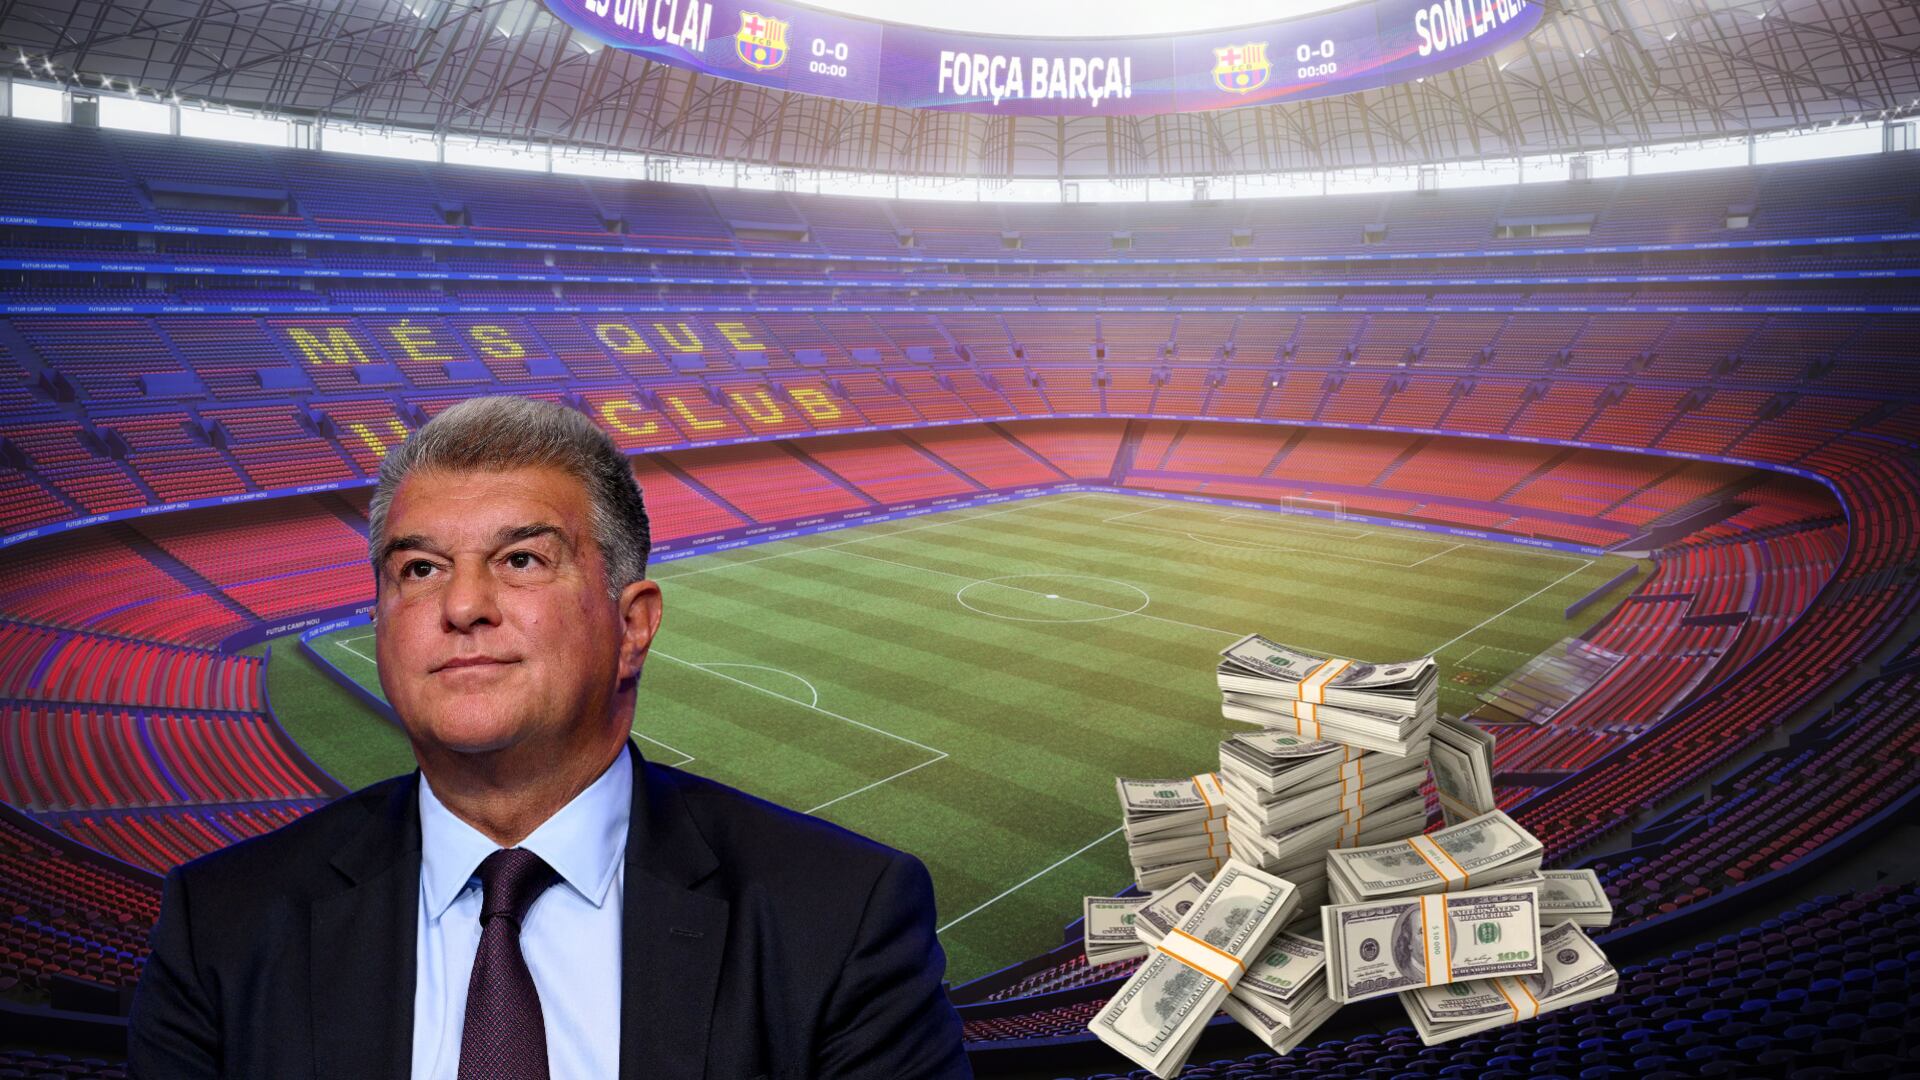 No sales necessary? Laporta's new plan that will generate $173M for FC Barcelona